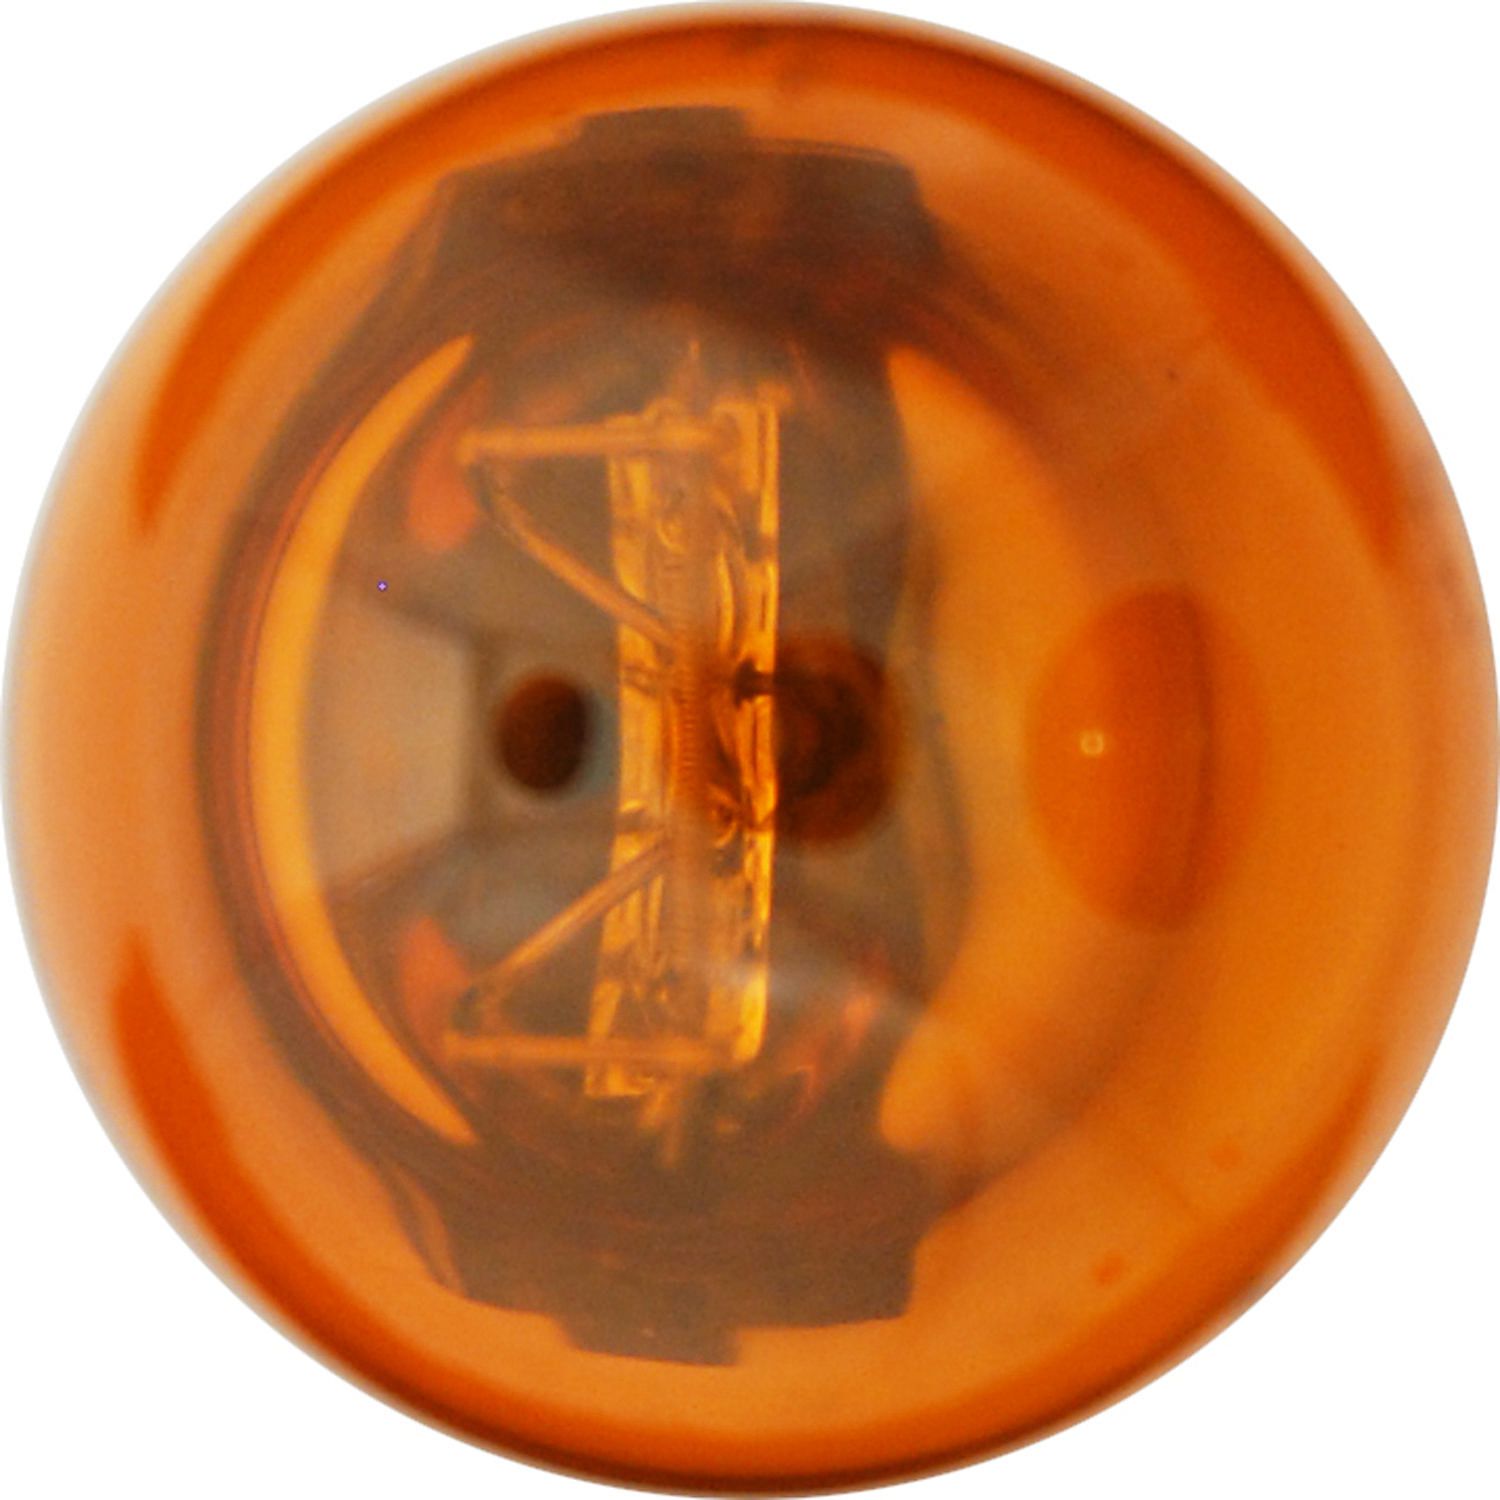 Ideal for Park and Turn Lights SYLVANIA 3457A Long Life Miniature Amber Bulb Contains 2 Bulbs 